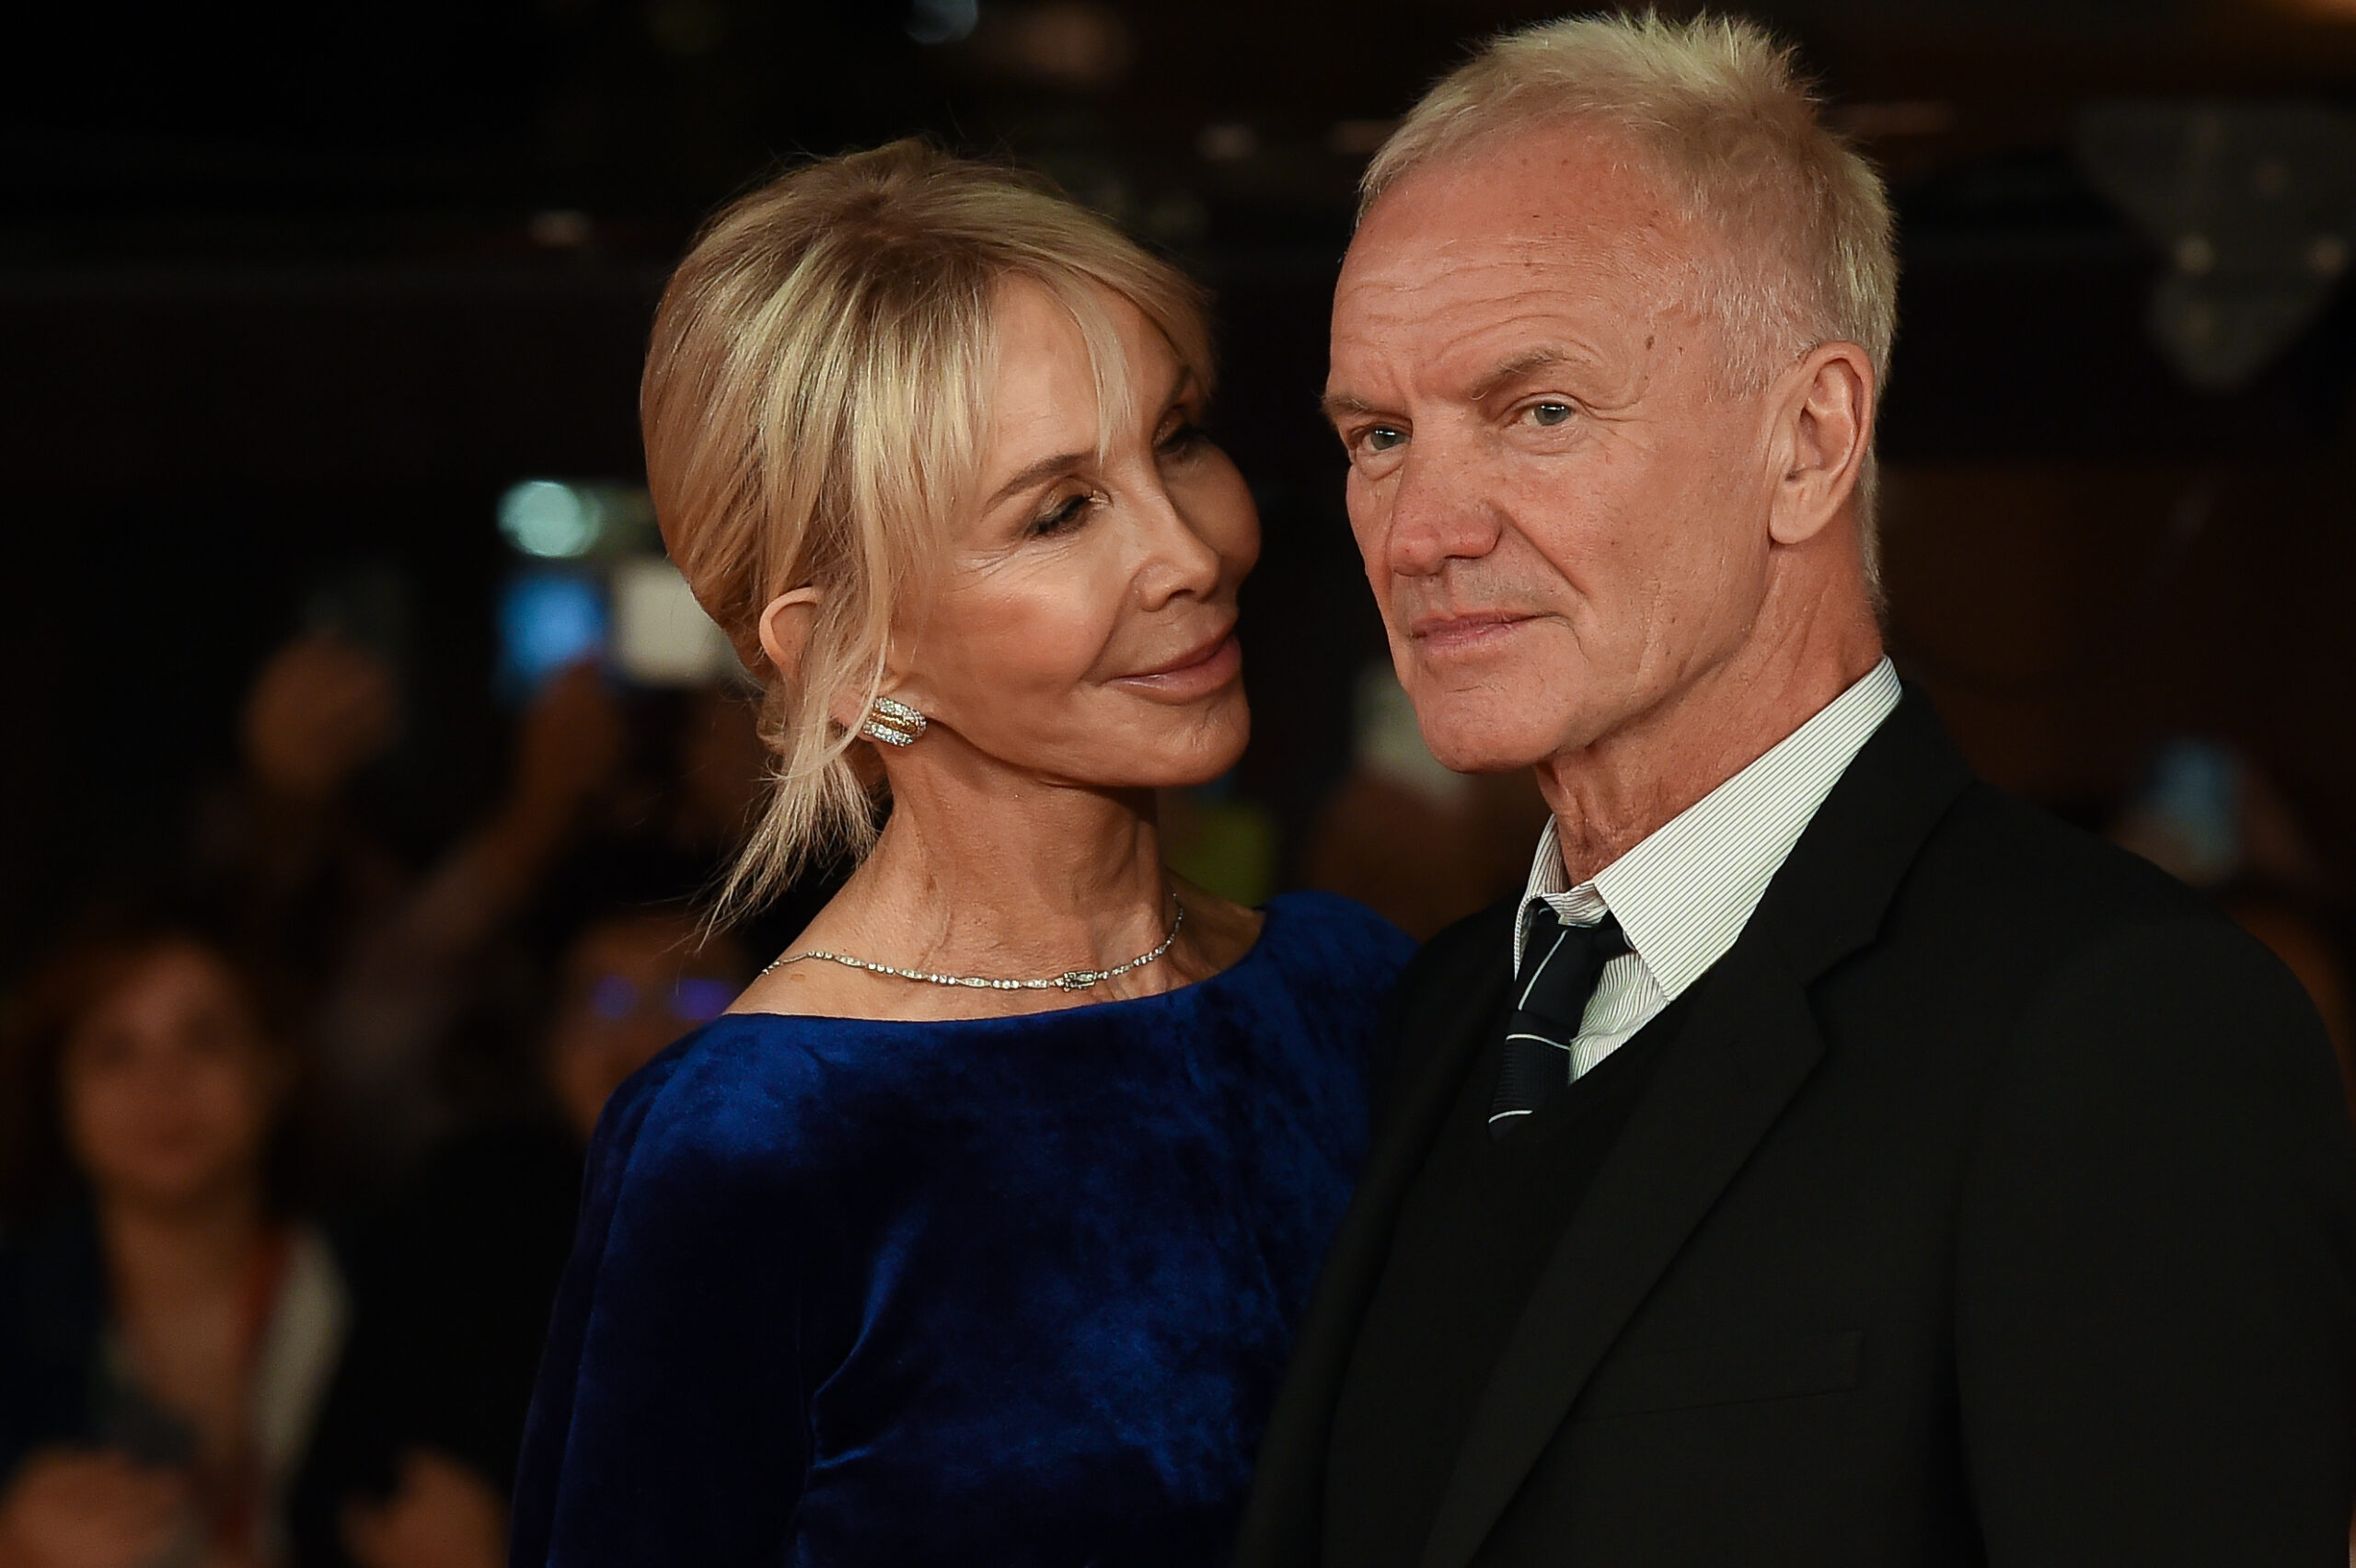 Trudie Styler and Sting at the Rome Film Fest 2023 during the "Posso entrare? An Ode to Naples" on October 23, 2023, in Italy. | Source: Getty Images